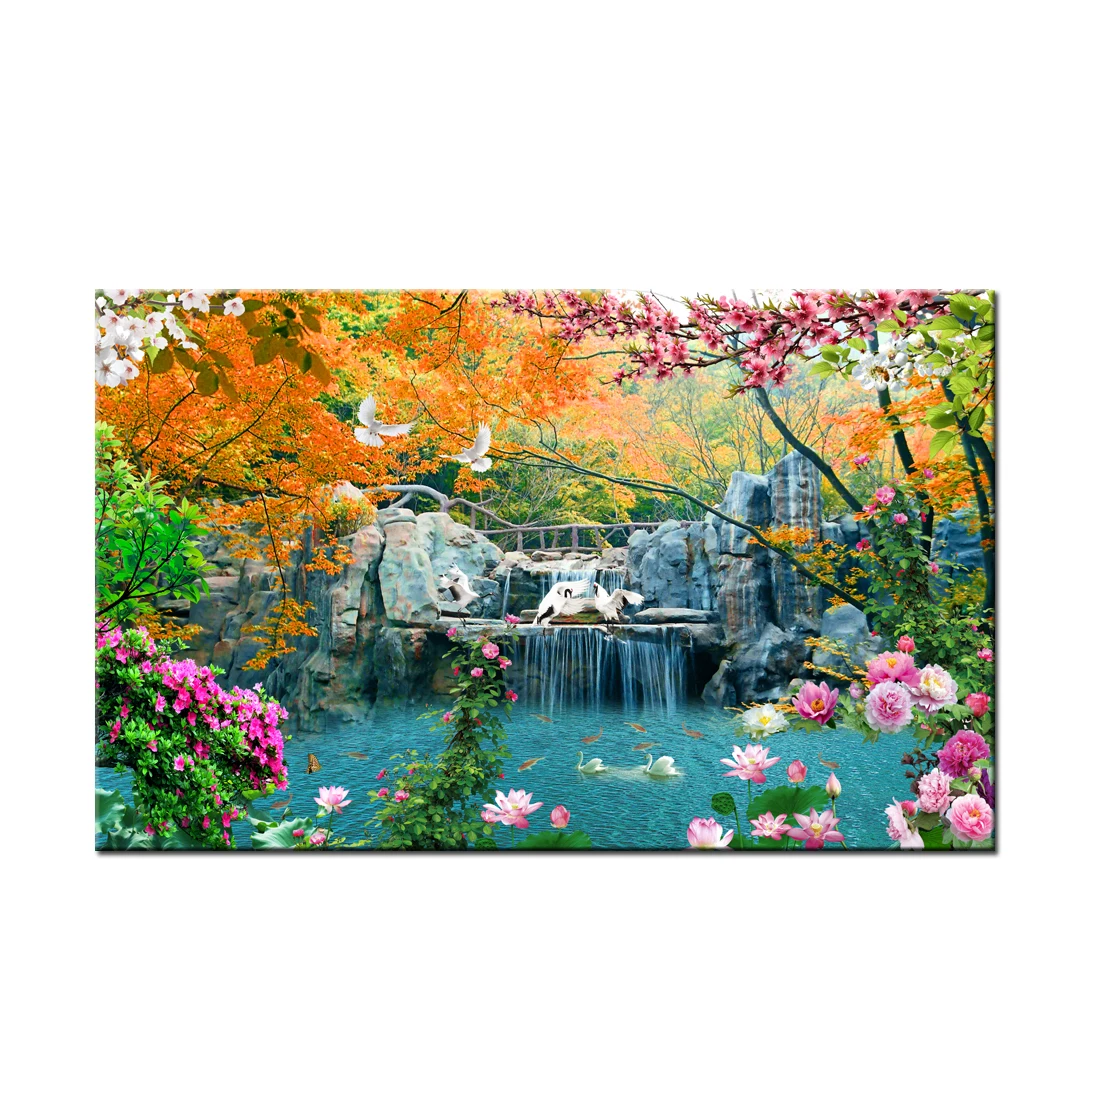 

Wall Art Canvas Print Painting Forest Waterfall Landscape Nature Flowers HD Picture Living Room Home Decor HYS2017